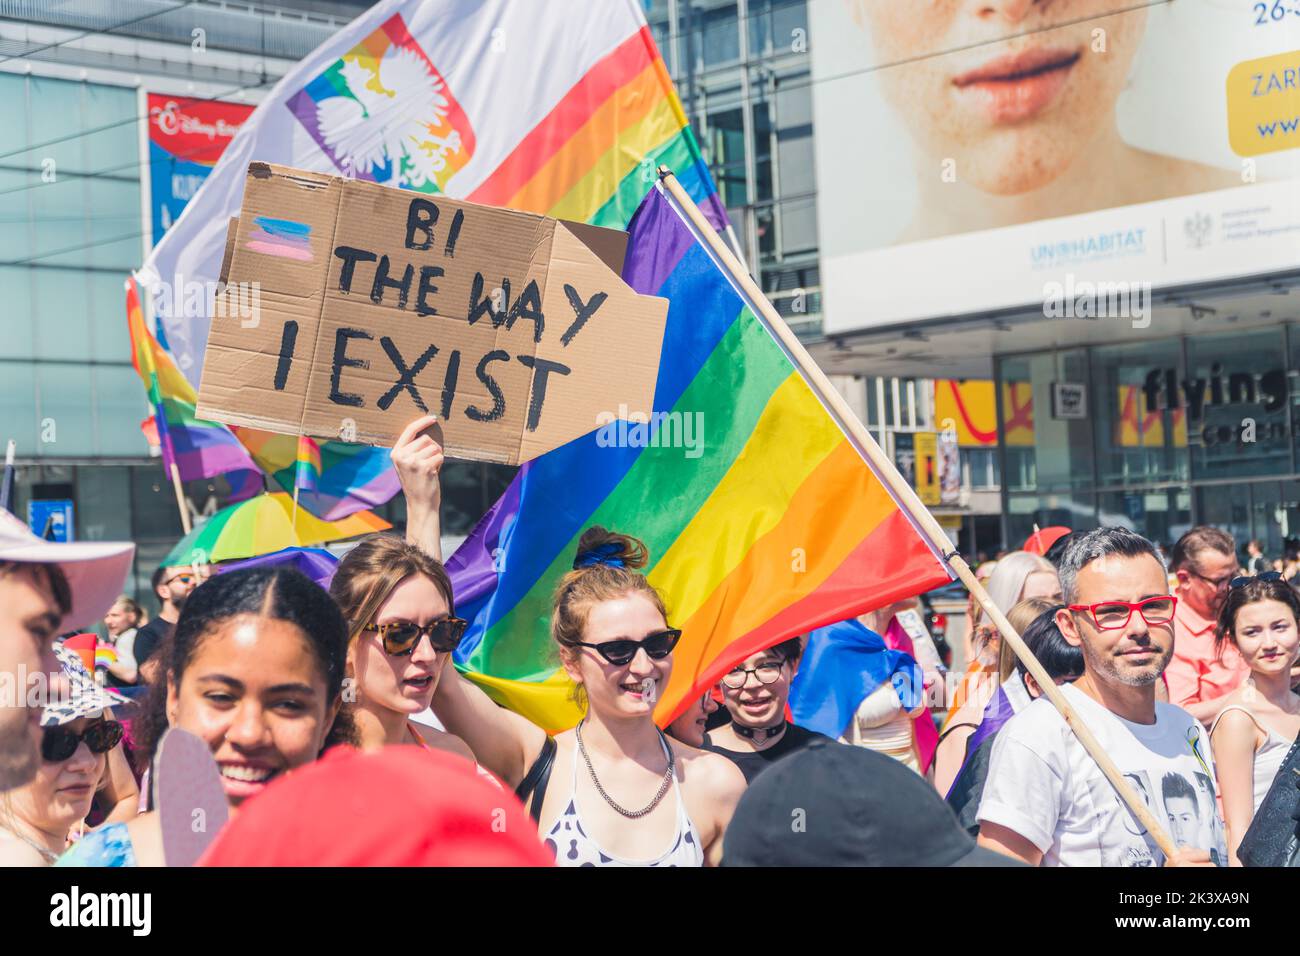 June 25, 2022 Warsaw, Poland - Equality parade in Warsaw, Poland. Huge crowd of diverse people marching with LGBTQ flags and powerful protest signs. Fighting back against homophobia. High quality photo Stock Photo